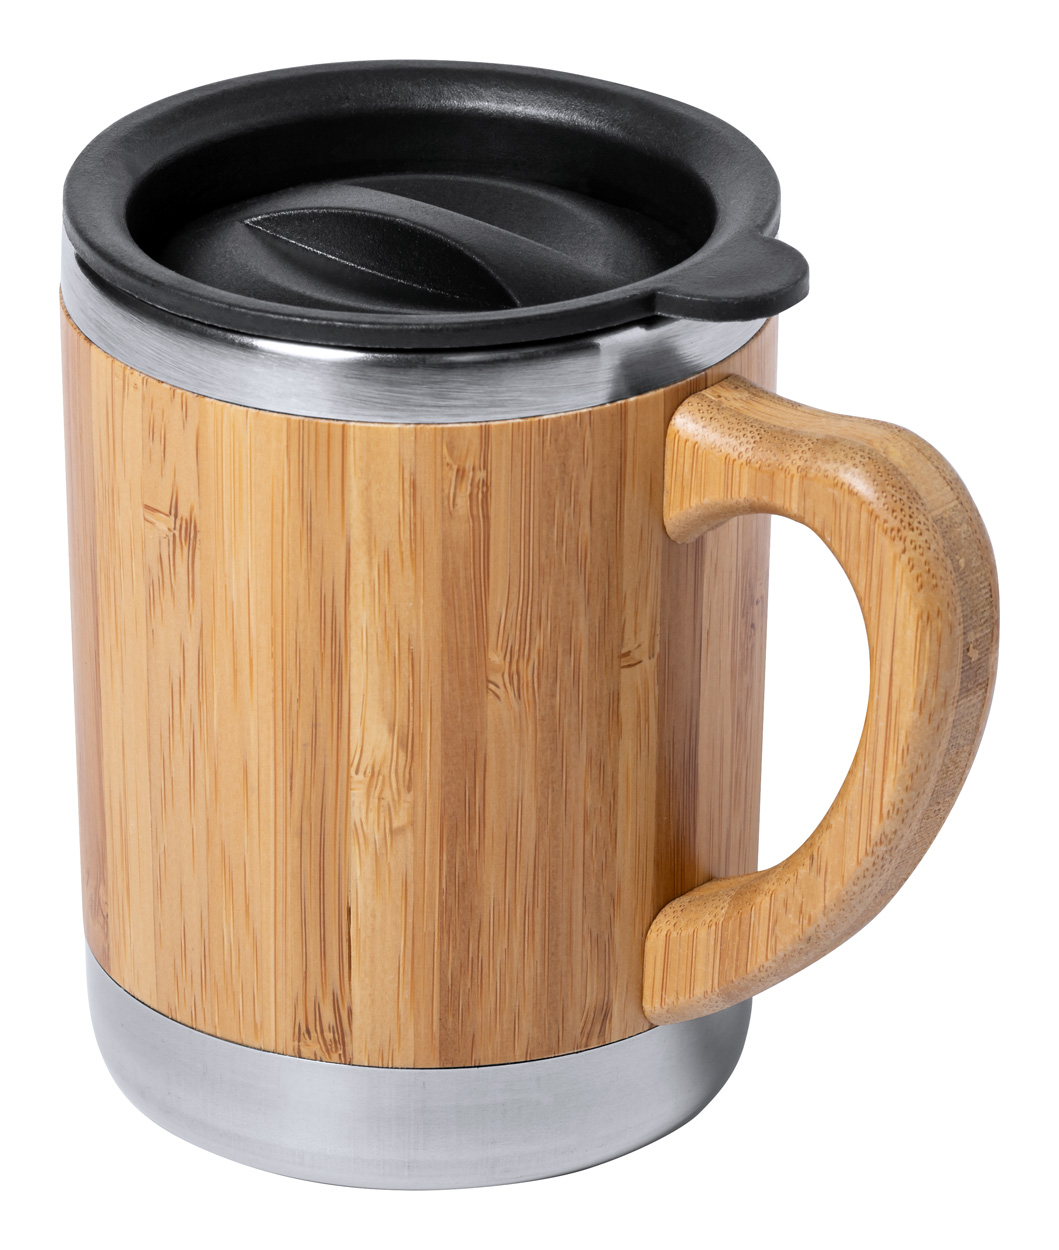 Stainless steel thermo mug VANATIN with bamboo surface, 300 ml - natural